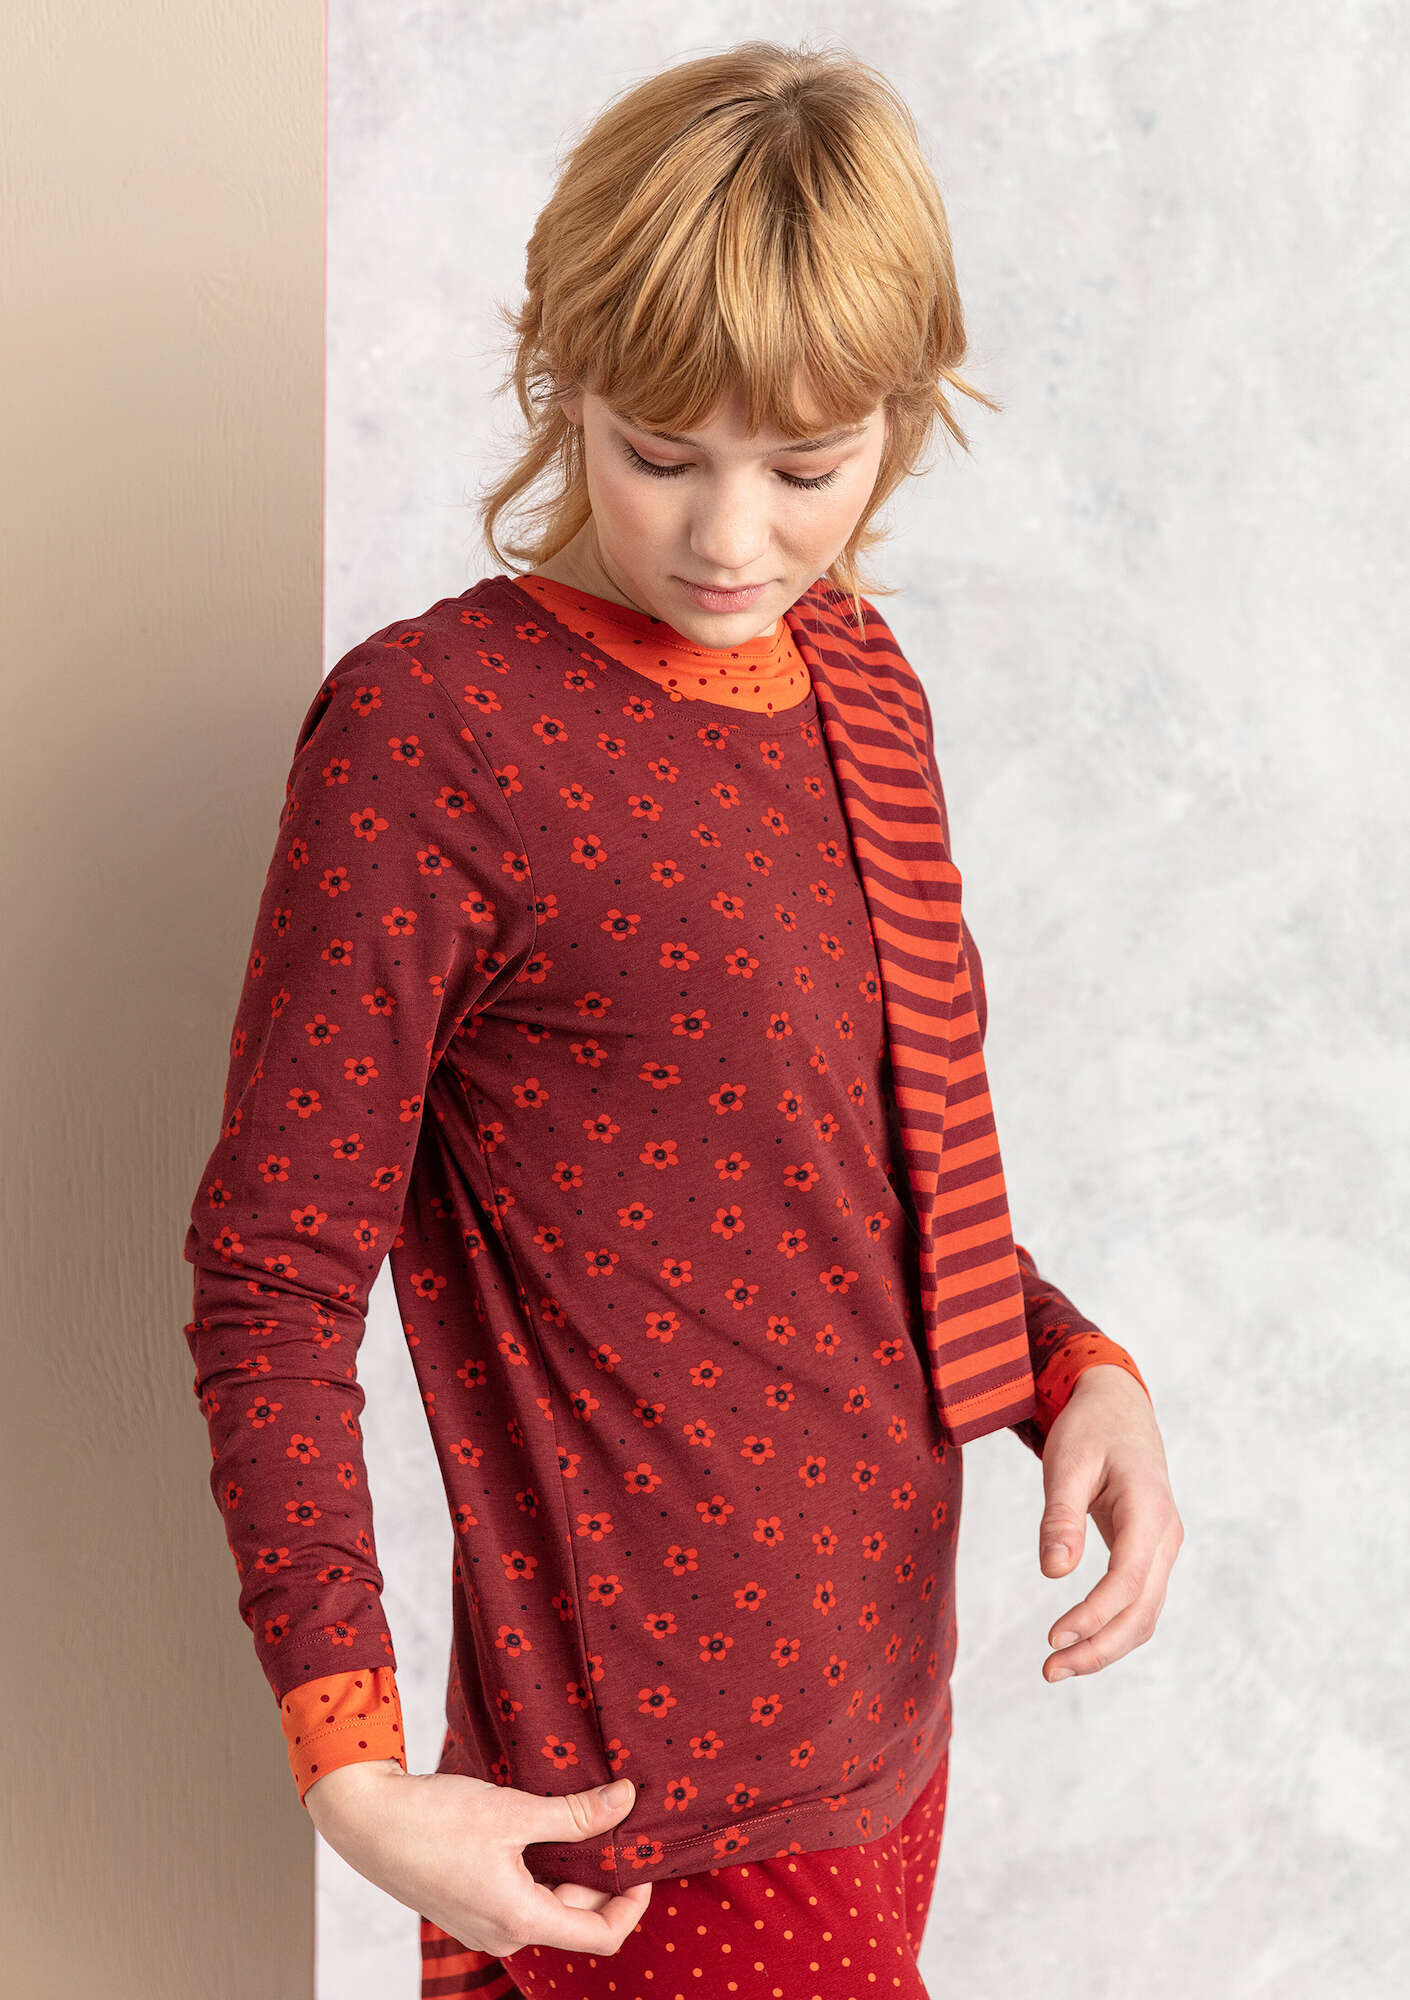 “Pytte” jersey top in organic cotton/spandex agate red/patterned